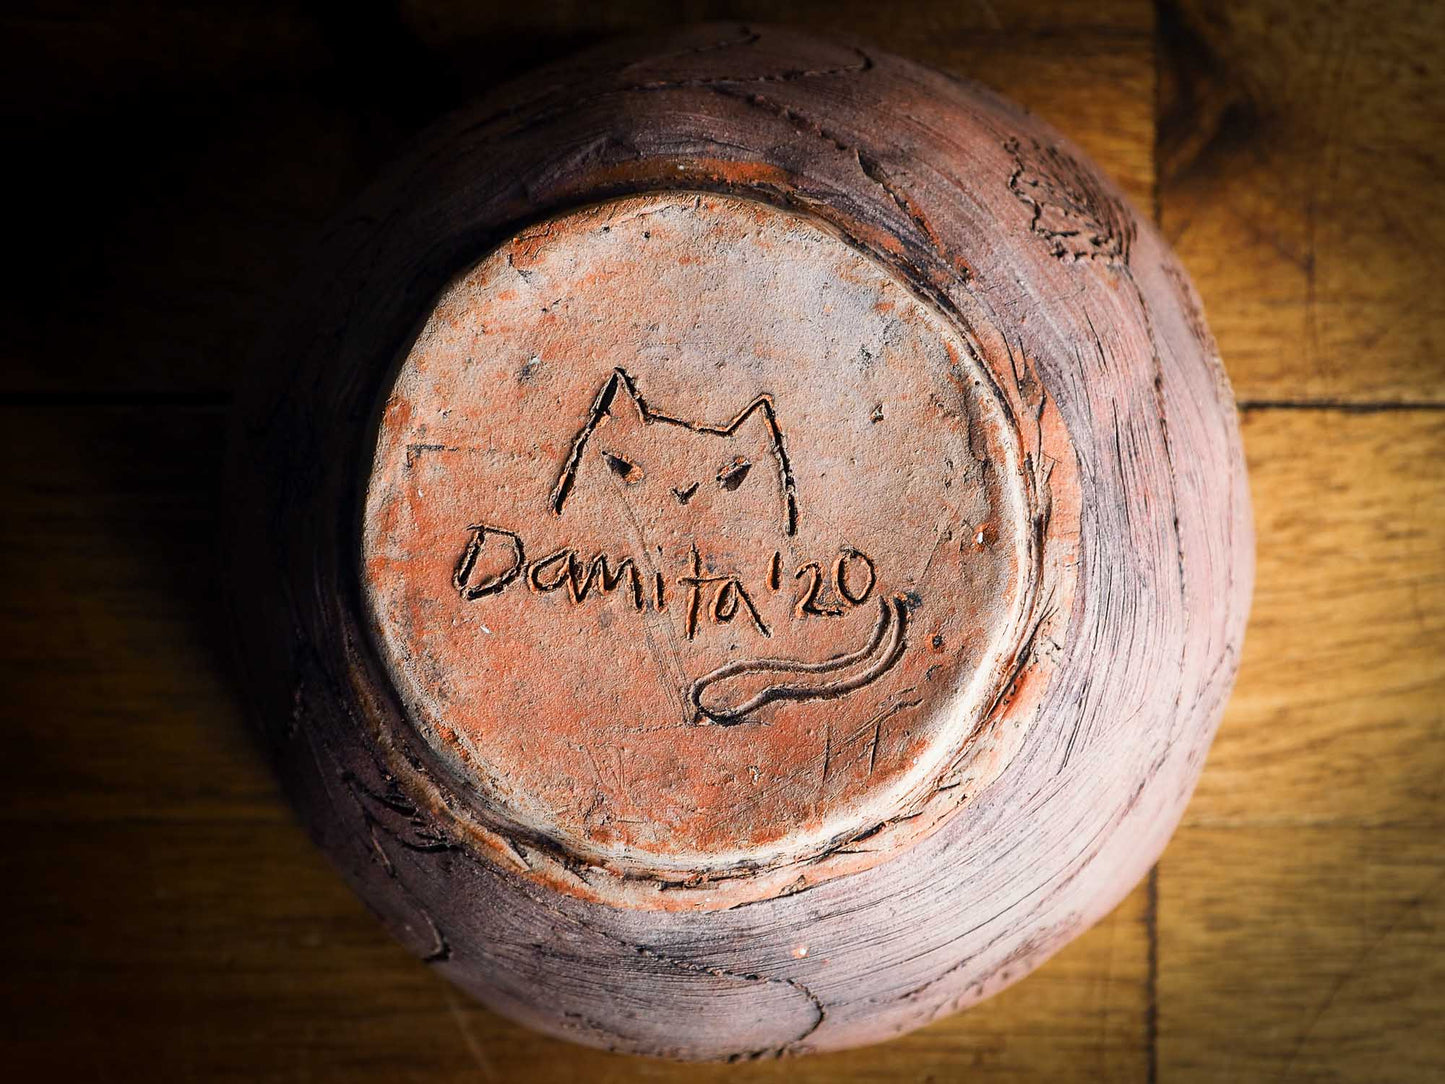 An original Idania Salcido Danita Art pinched ceramic cat pet food bowl. Handmade from locally foraged clay, this glazed ceramics one of a kind artwork is perfect for any kitchen plate and bowls unique collection. Thumbprints and  intentionally irregular shape give the bowl a cozy, warmly familiar feel when you pick it.